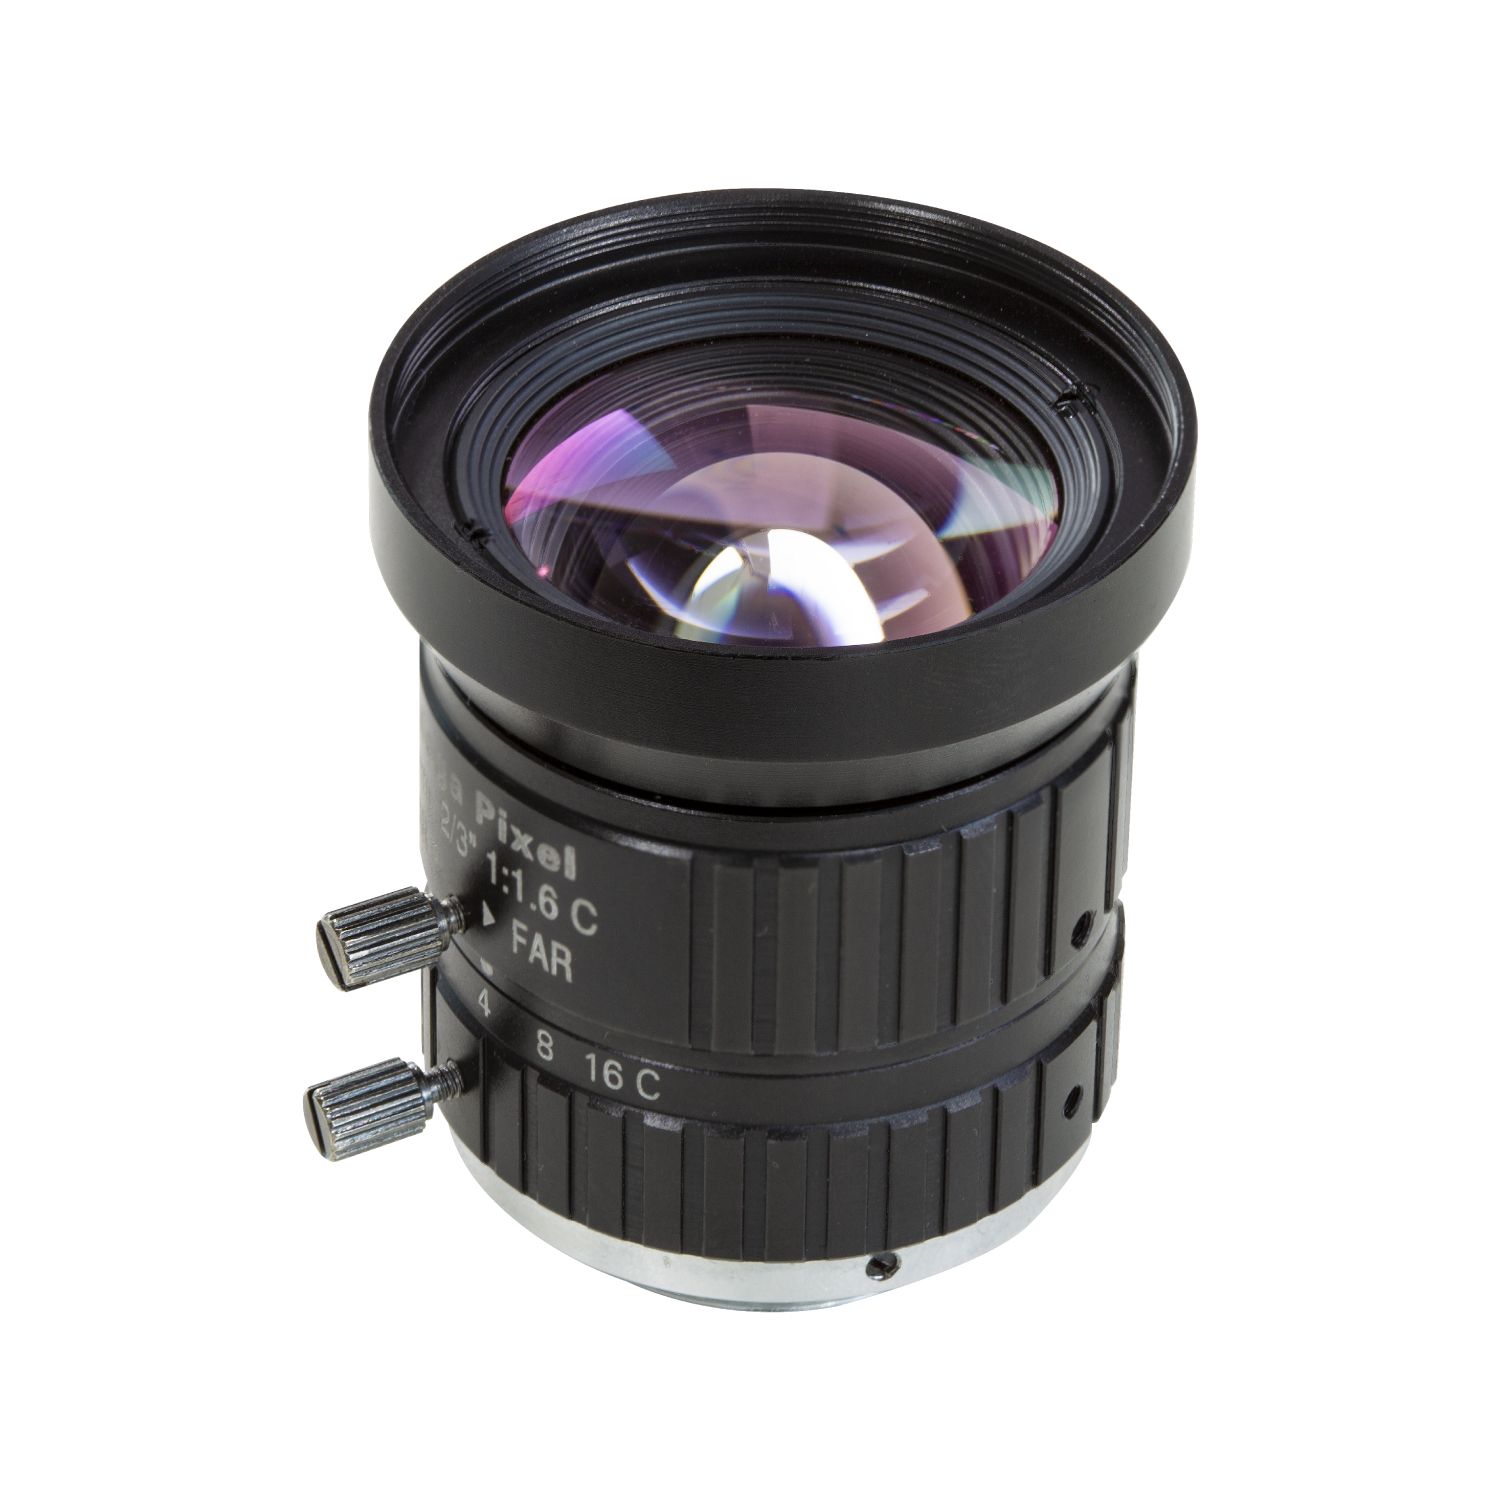 Arducam C-Mount Lens for Raspberry Pi High Quality Camera, 8mm Focal Length  with Manual Focus and Adjustable Aperture